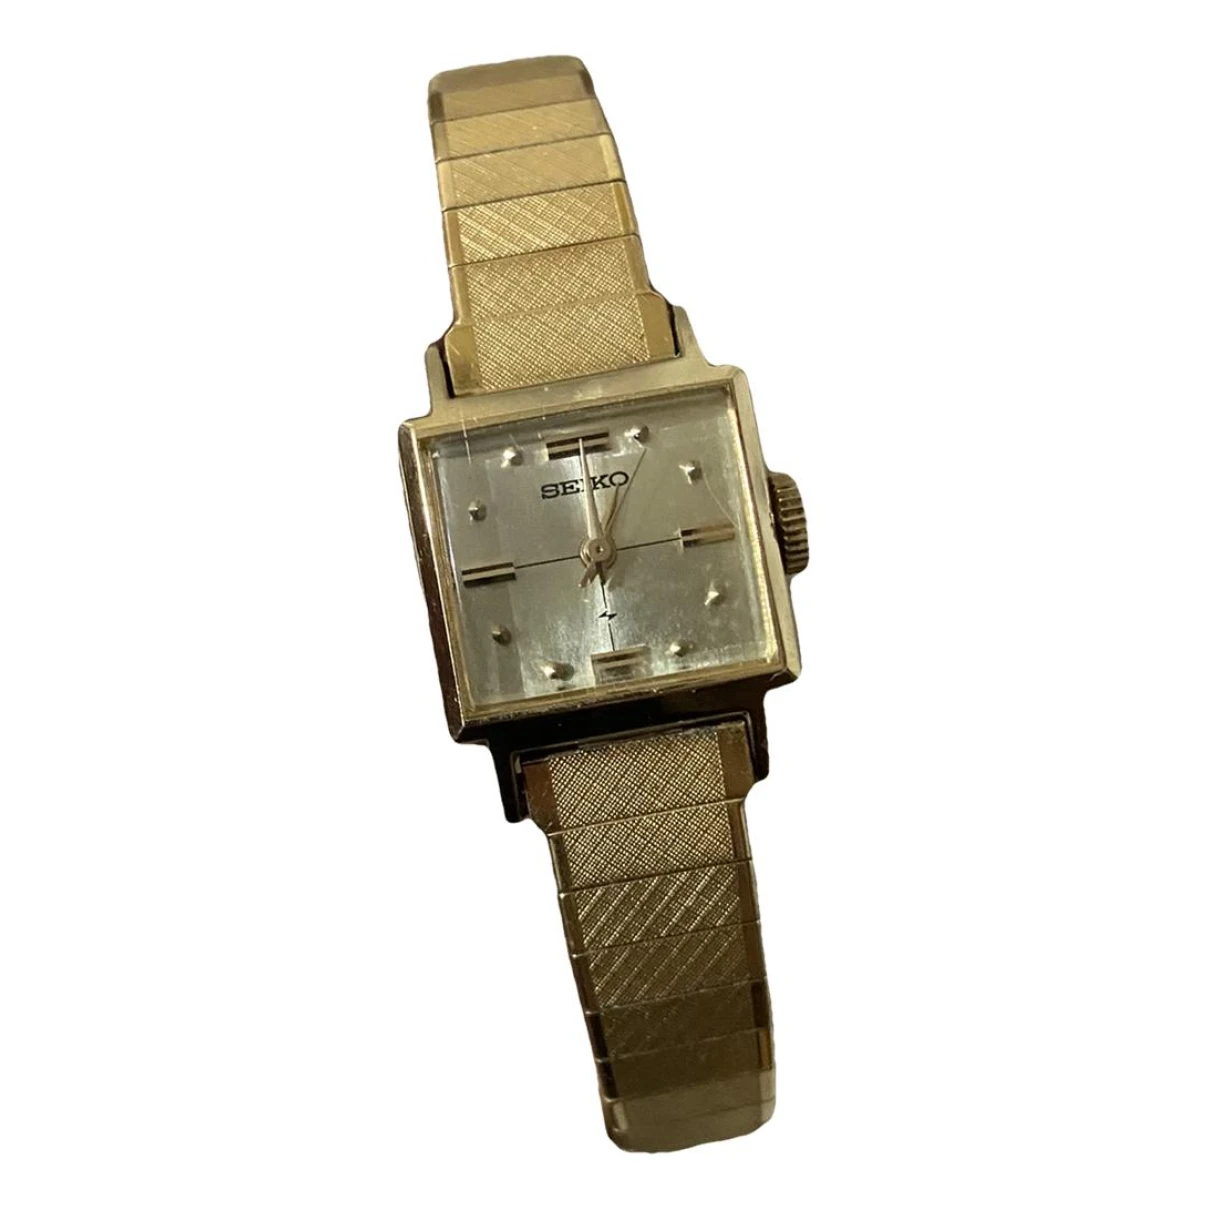 Pre-owned Seiko Gold Watch